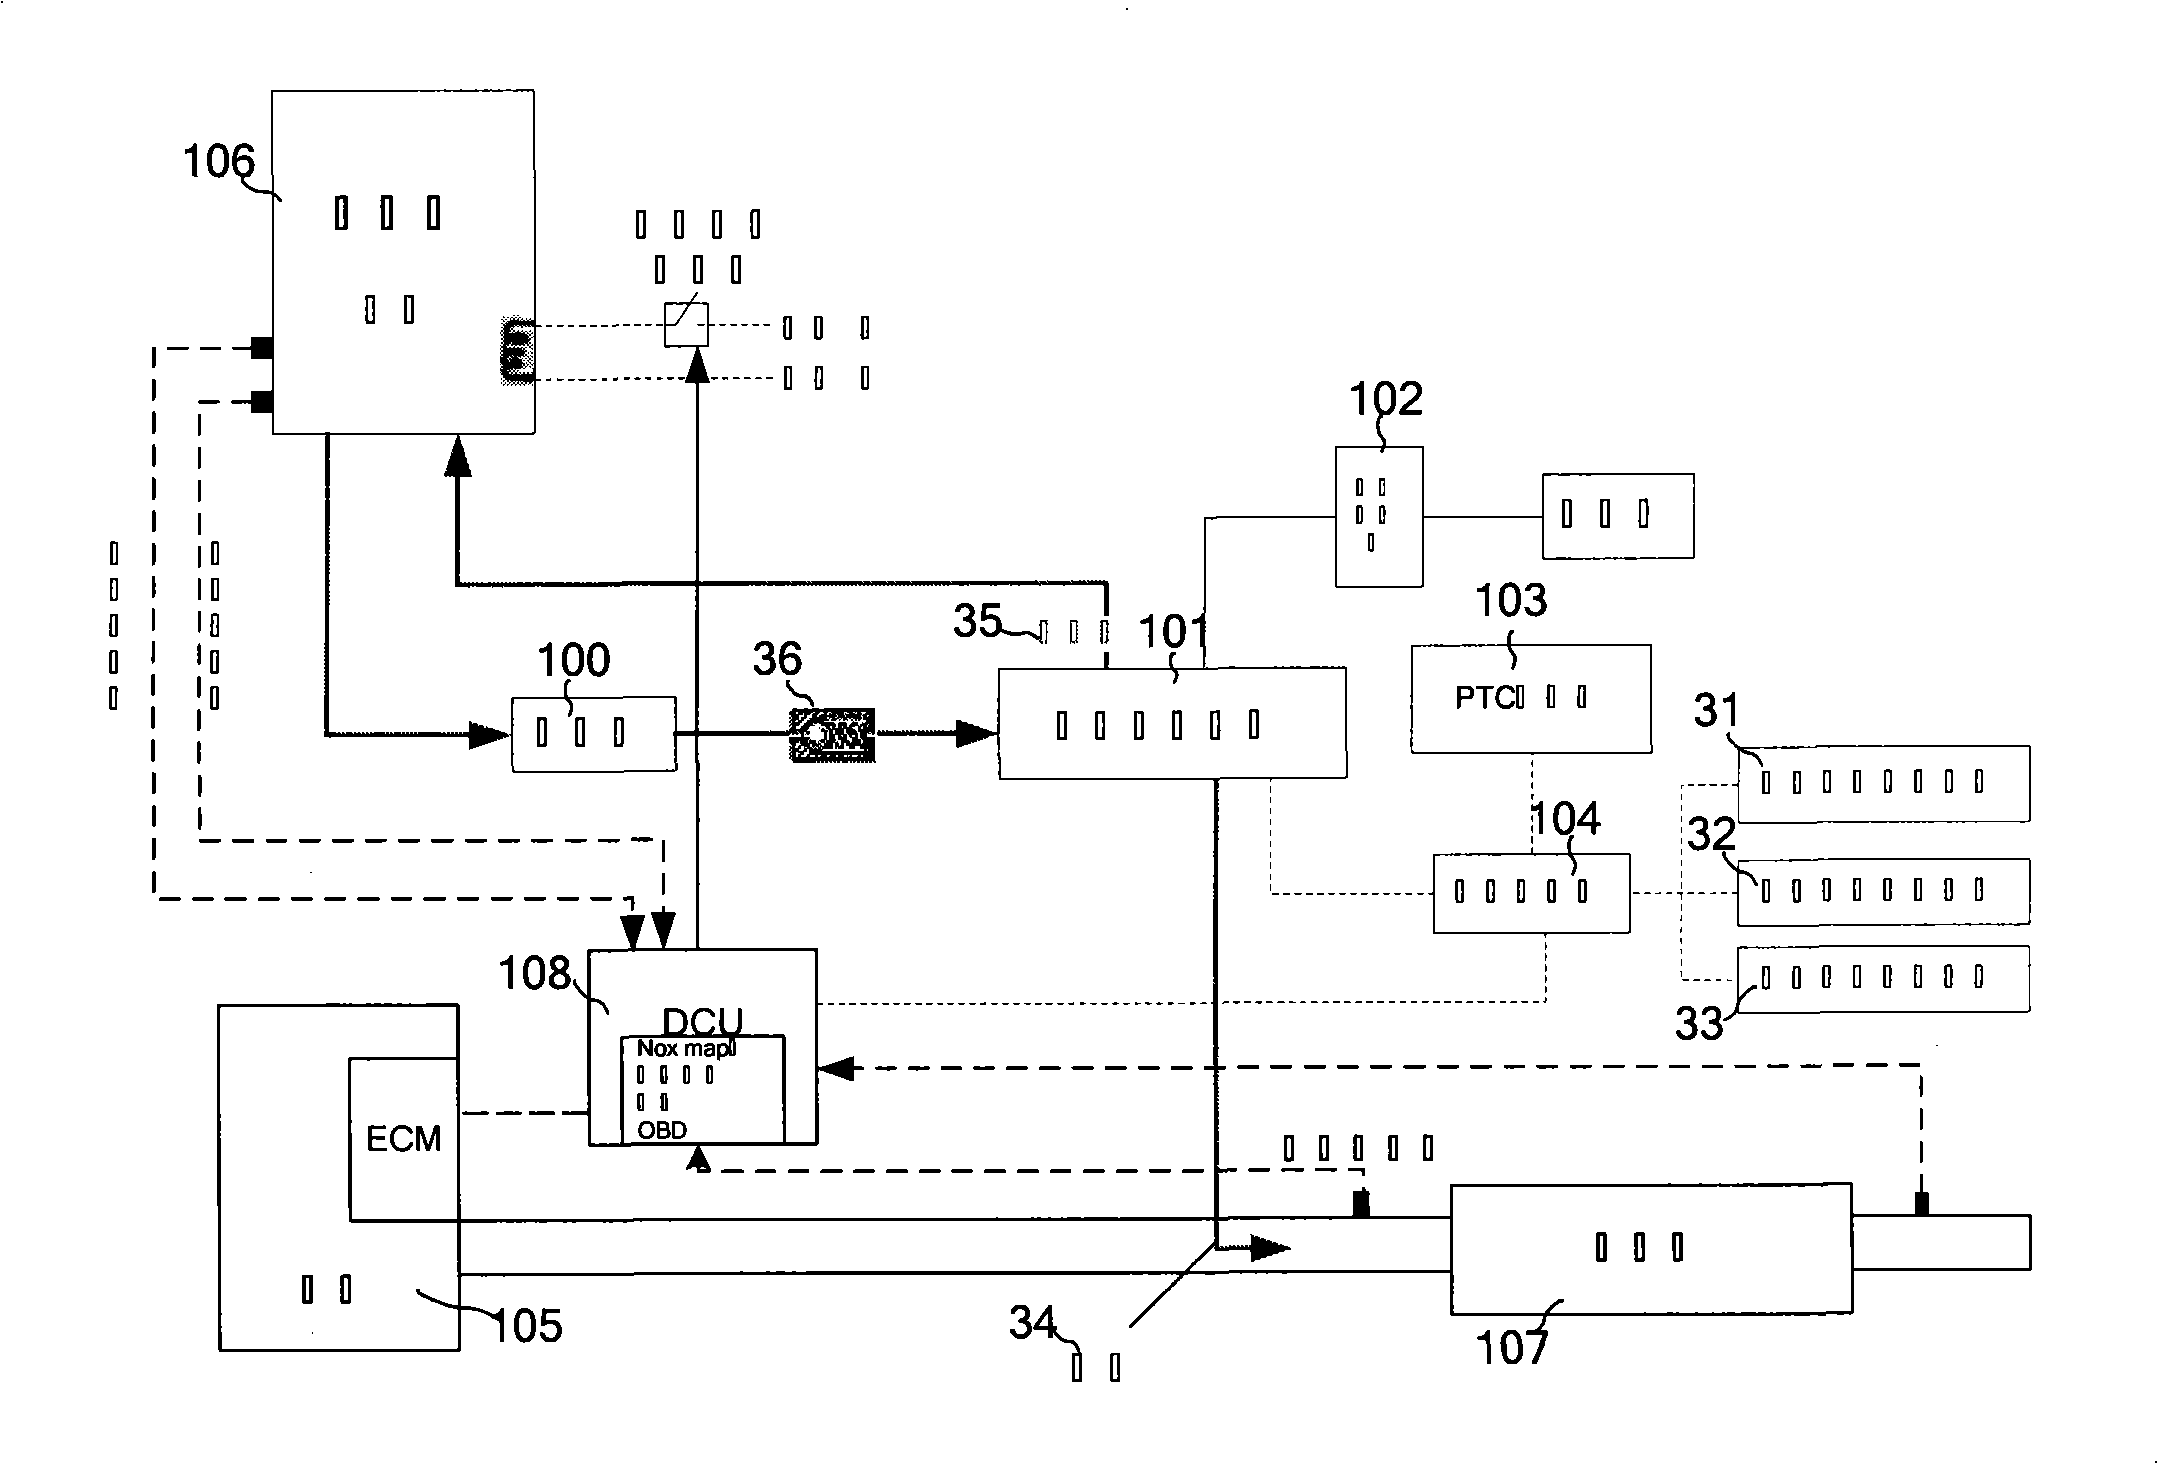 Air mixing and metering system for processing vehicle exhaust